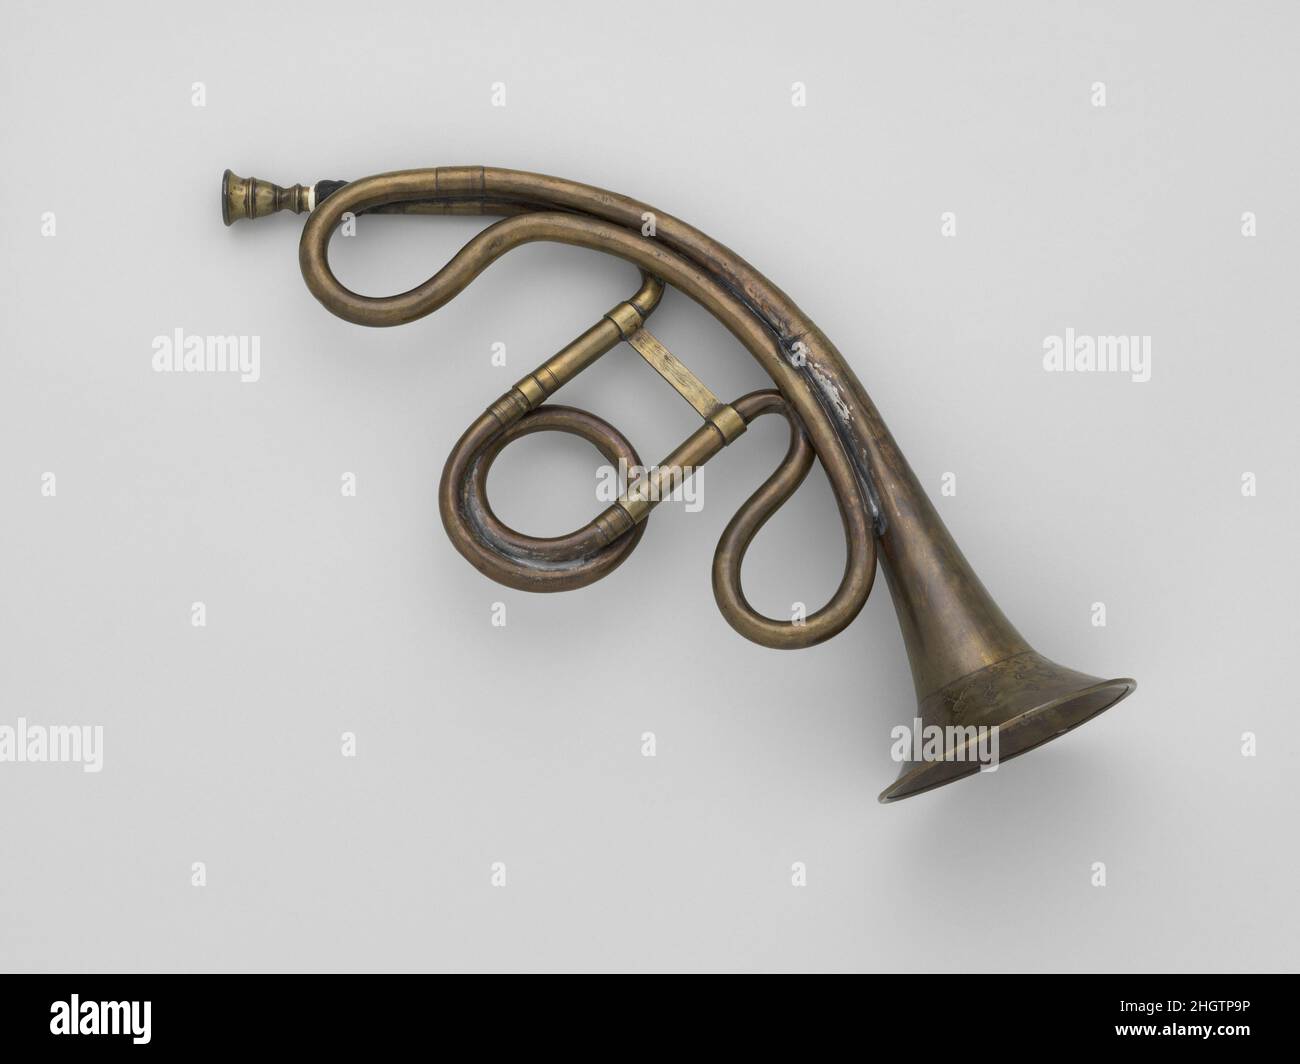 Trompette Demilune ca. 1810 German The curved form of this natural trumpet enabled the player to insert fingers into the bell and, by closing it off to varying degrees, alter the notes of the harmonic series to produce a scale. This stopping technique is similar to that used by hand horn players, but the smaller size of the trumpet’s bell made it less effective.. Trompette Demilune. German. ca. 1810. Brass. Markneukirchen, Germany. Aerophone-Lip Vibrated Stock Photo